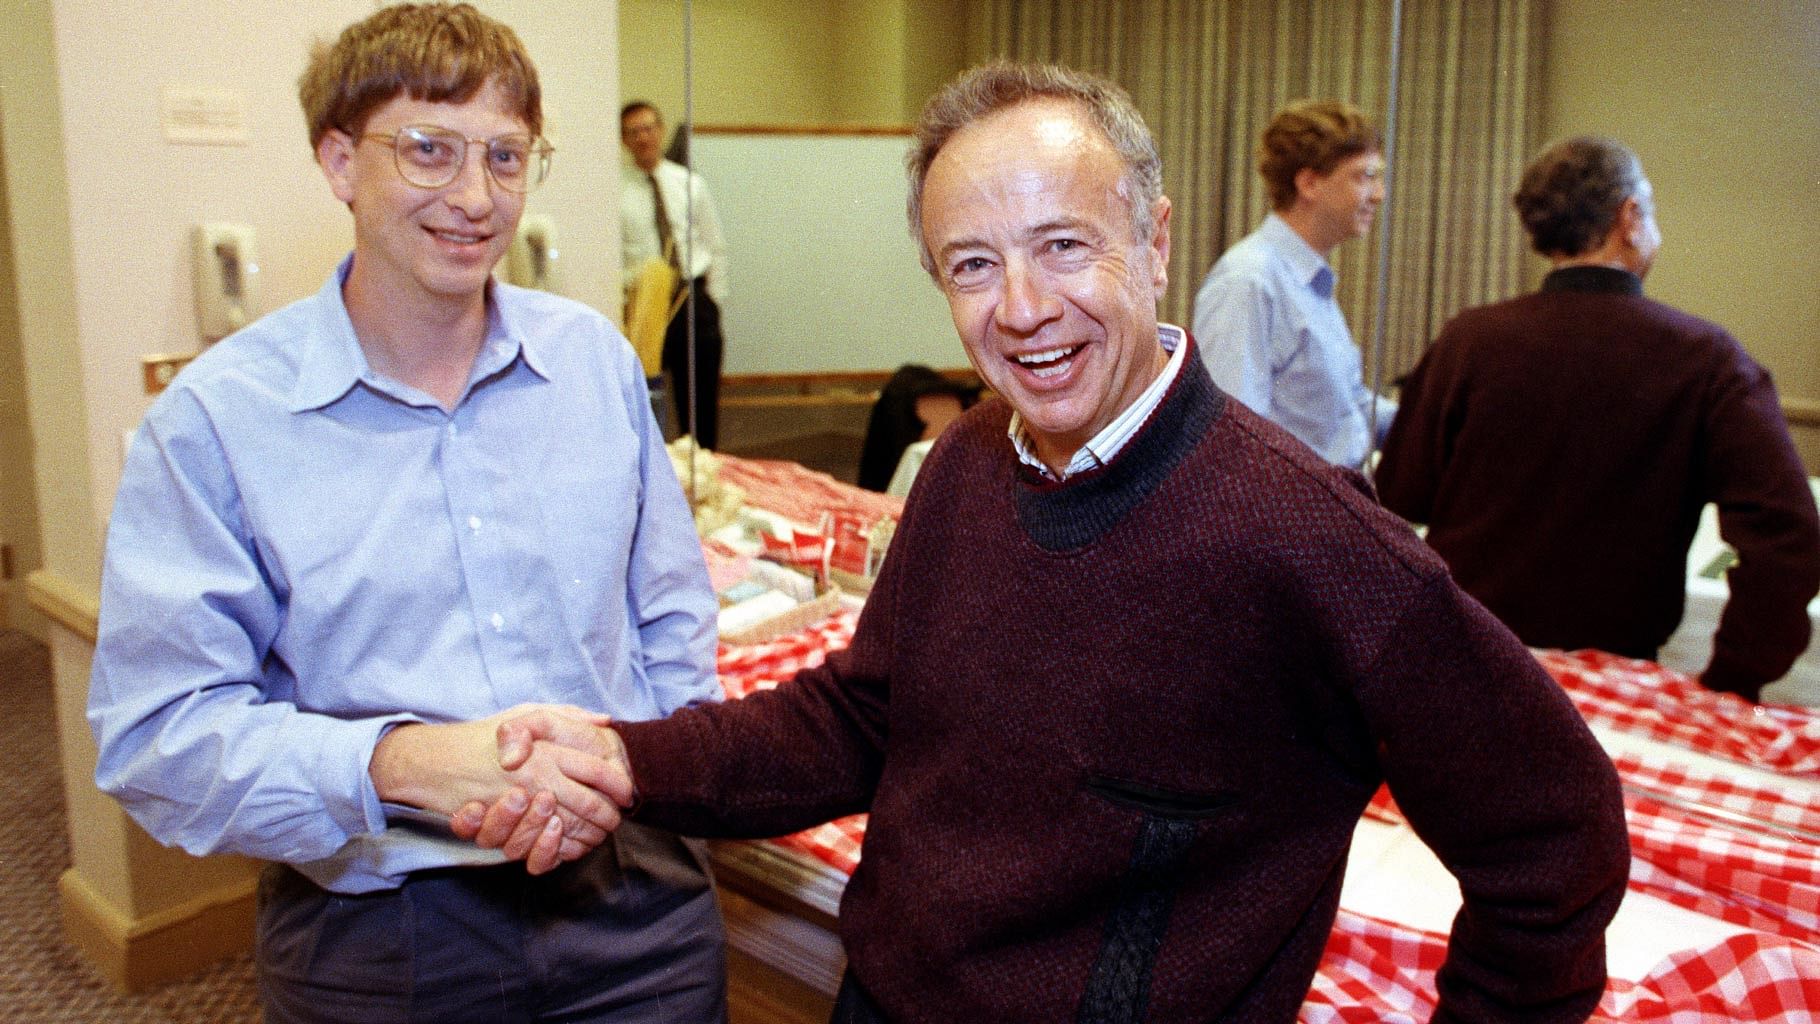 File photo of Intel Corp. President Andy Grove, right, shaking hands with Microsoft Chairman Bill Gates on 9 Nov 1992.&nbsp;(Photo: AP)